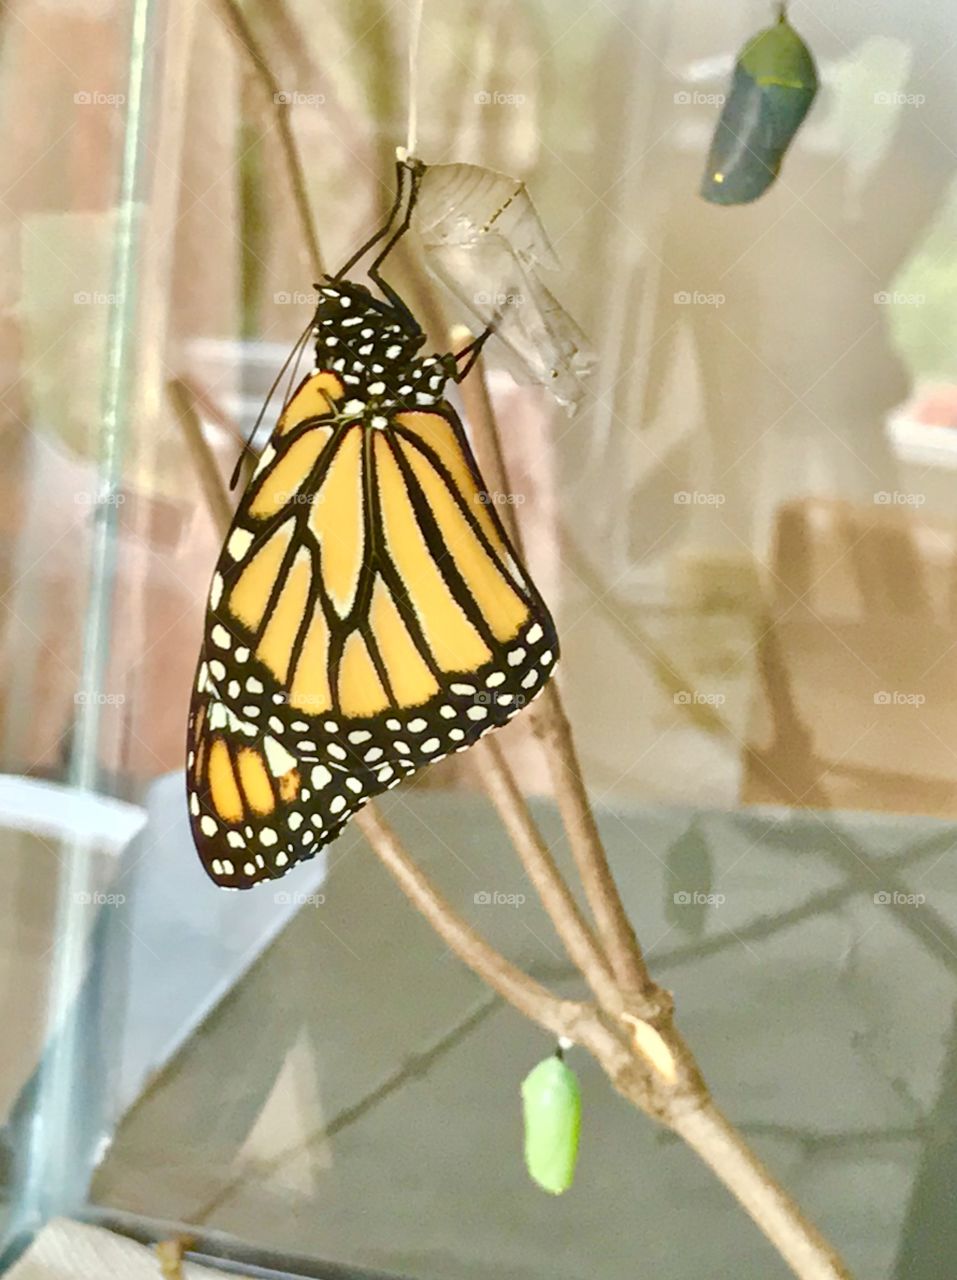 Newly emerged monarch butterfly on a branch in an aquarium with two chrysalis also visible 